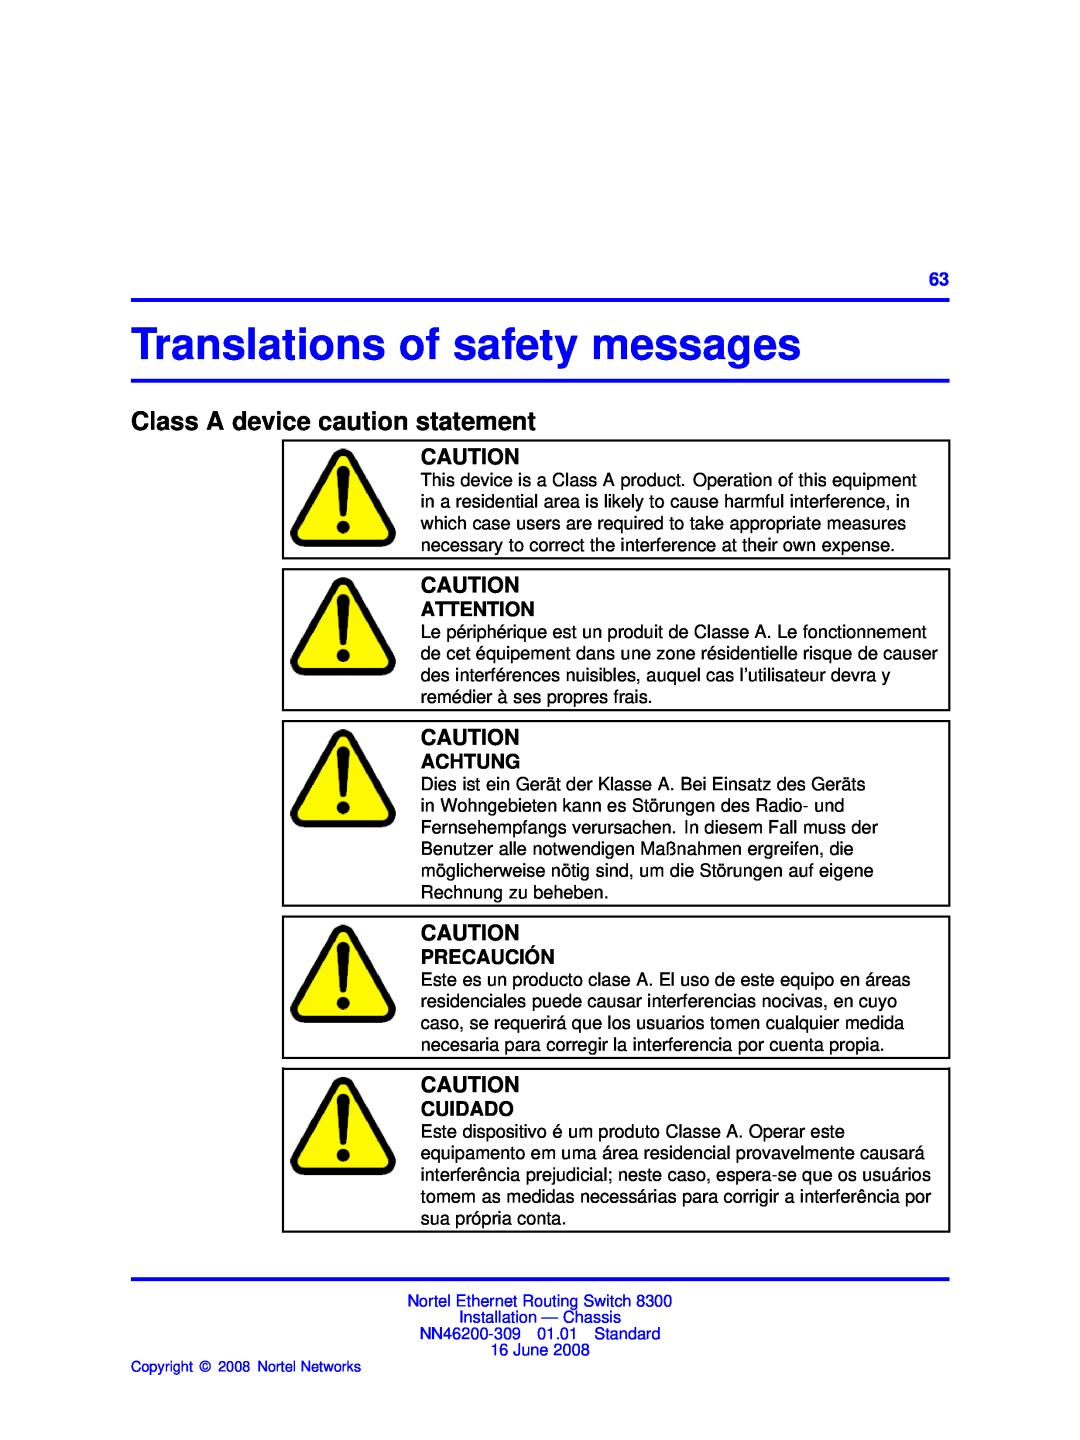 Nortel Networks 8306, 8310 Translations of safety messages, Class A device caution statement, Achtung, Precaución, Cuidado 